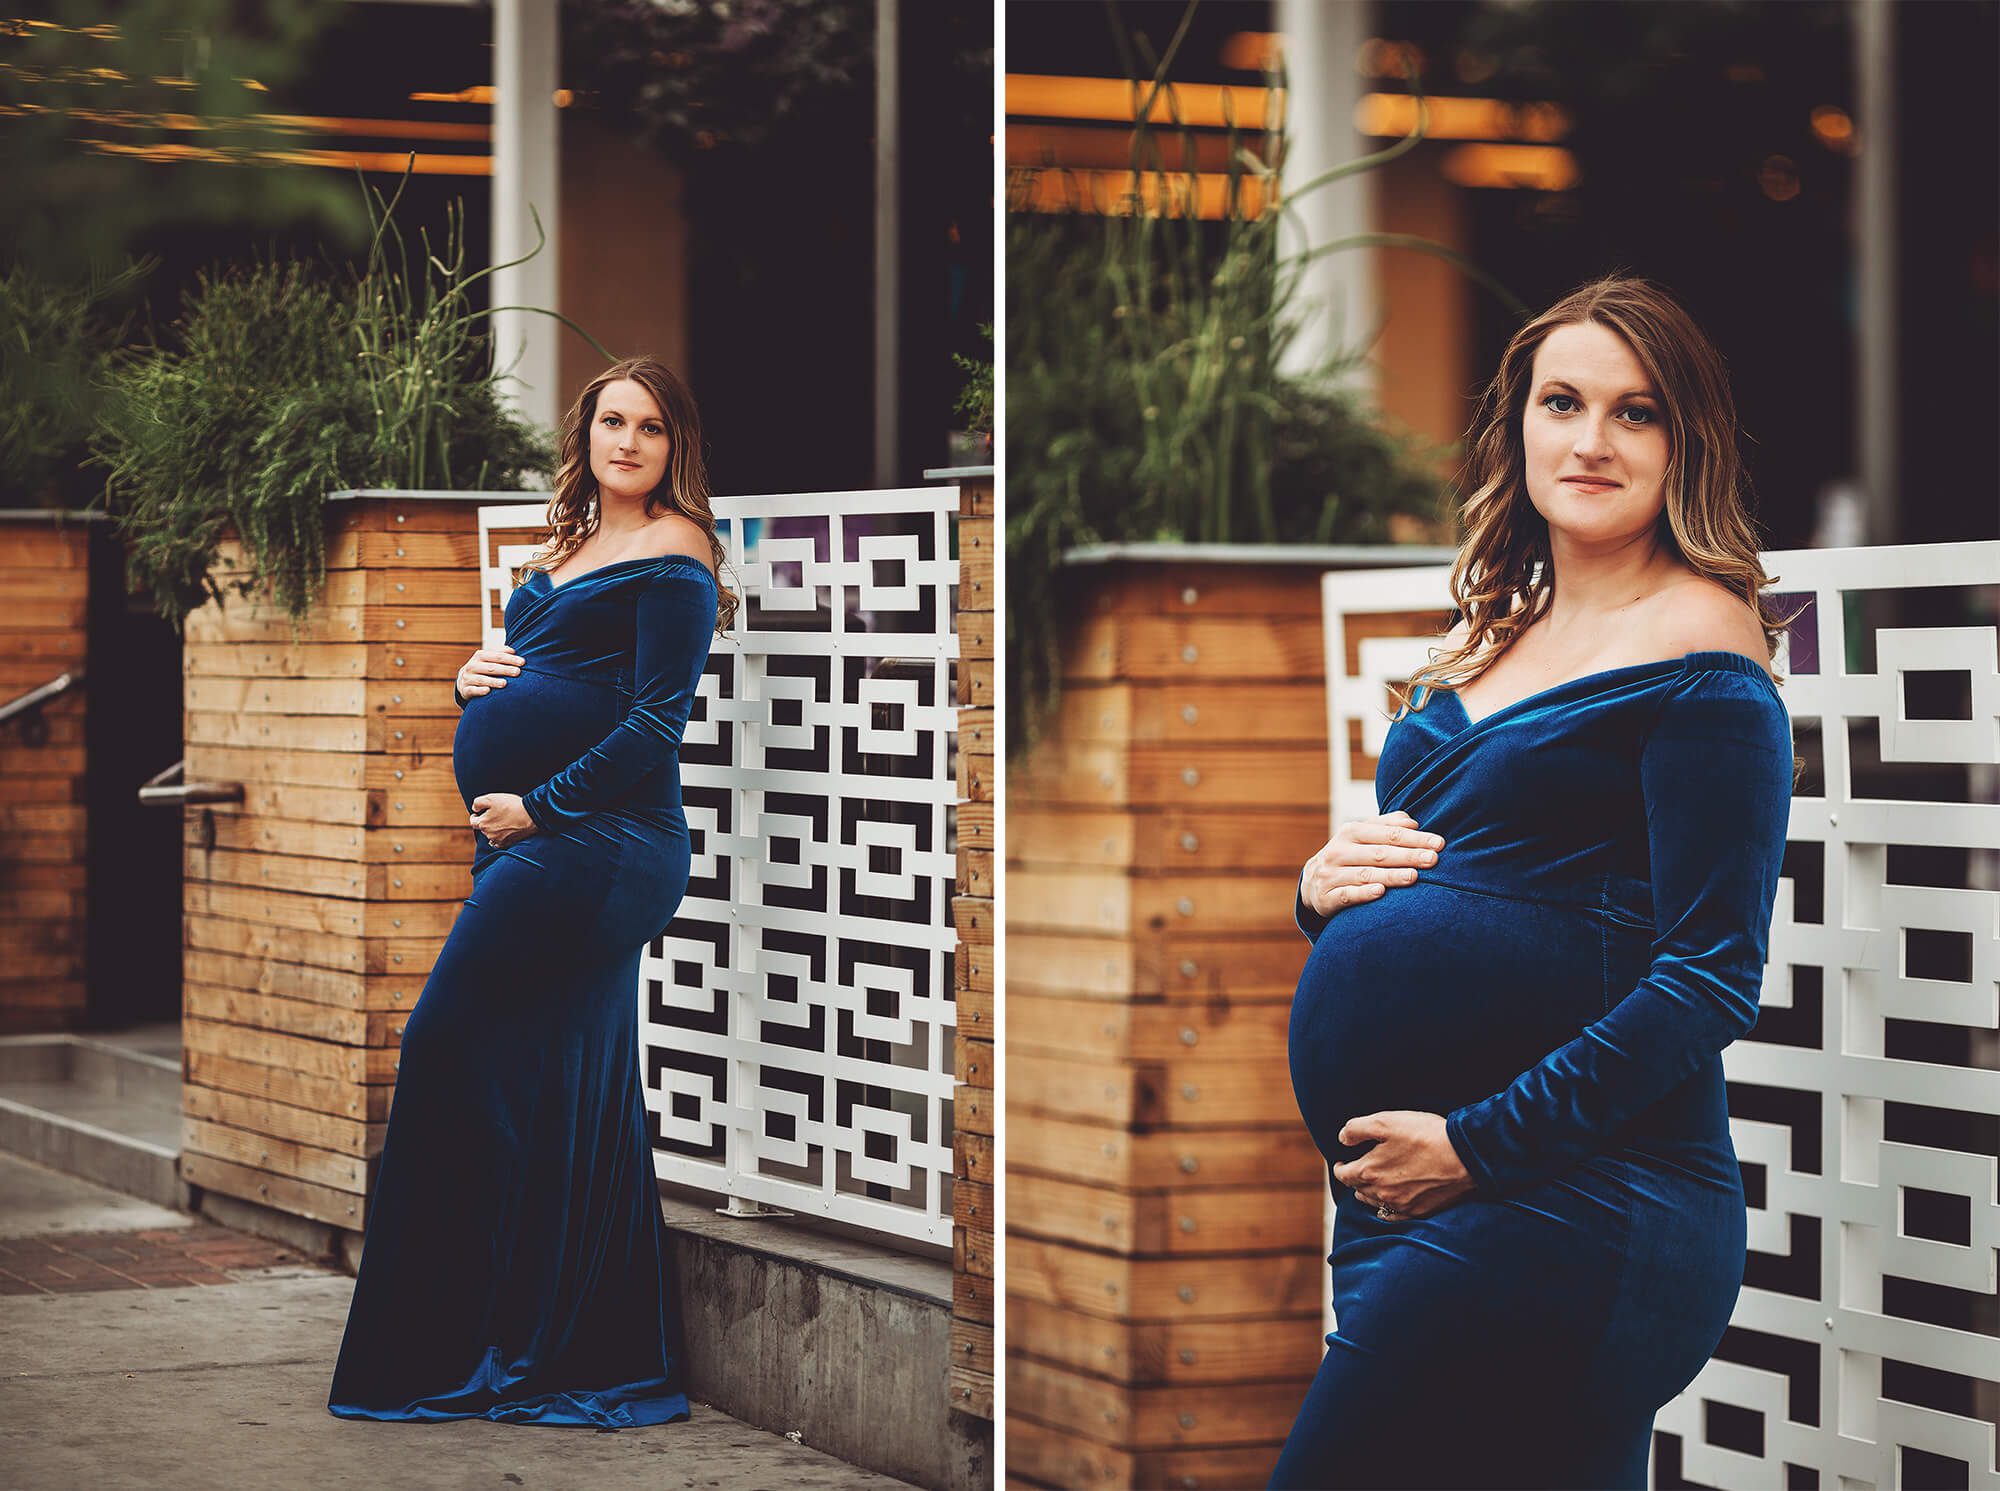 More maternity session shots in front of Tucson's Playground bar